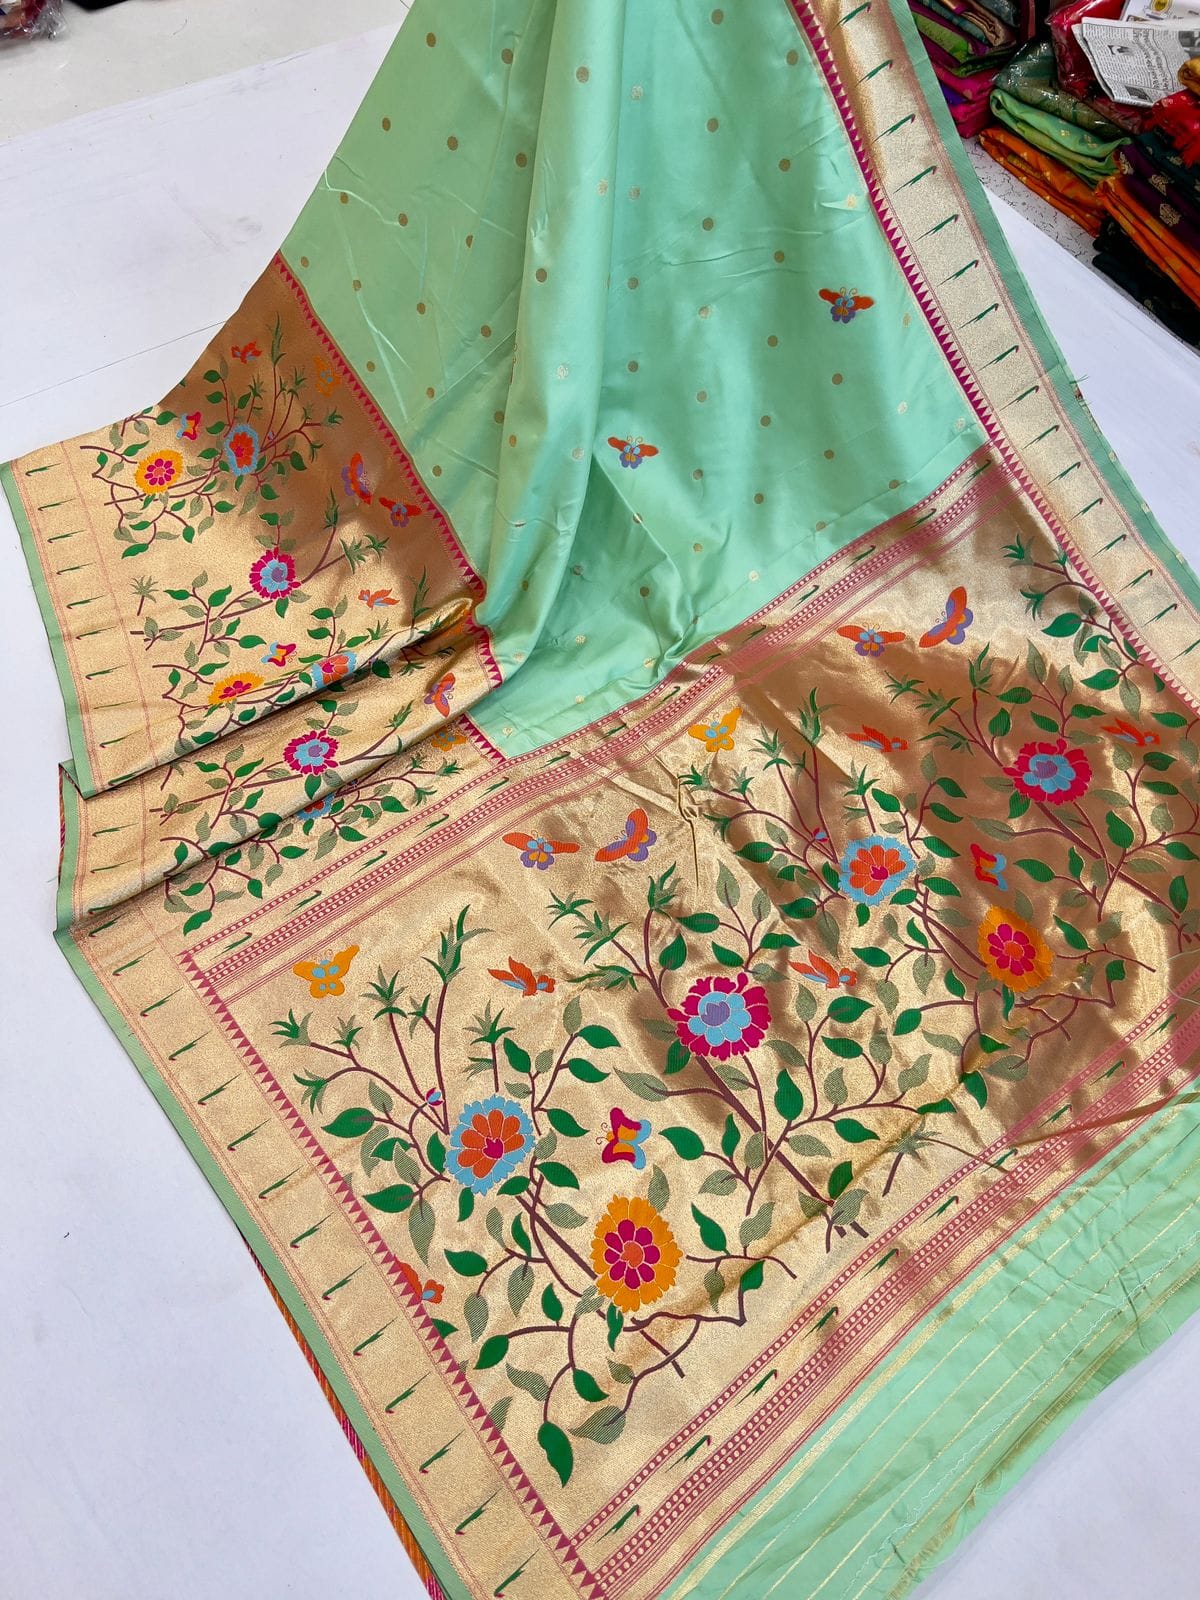 What is special in a Paithani saree? - Quora